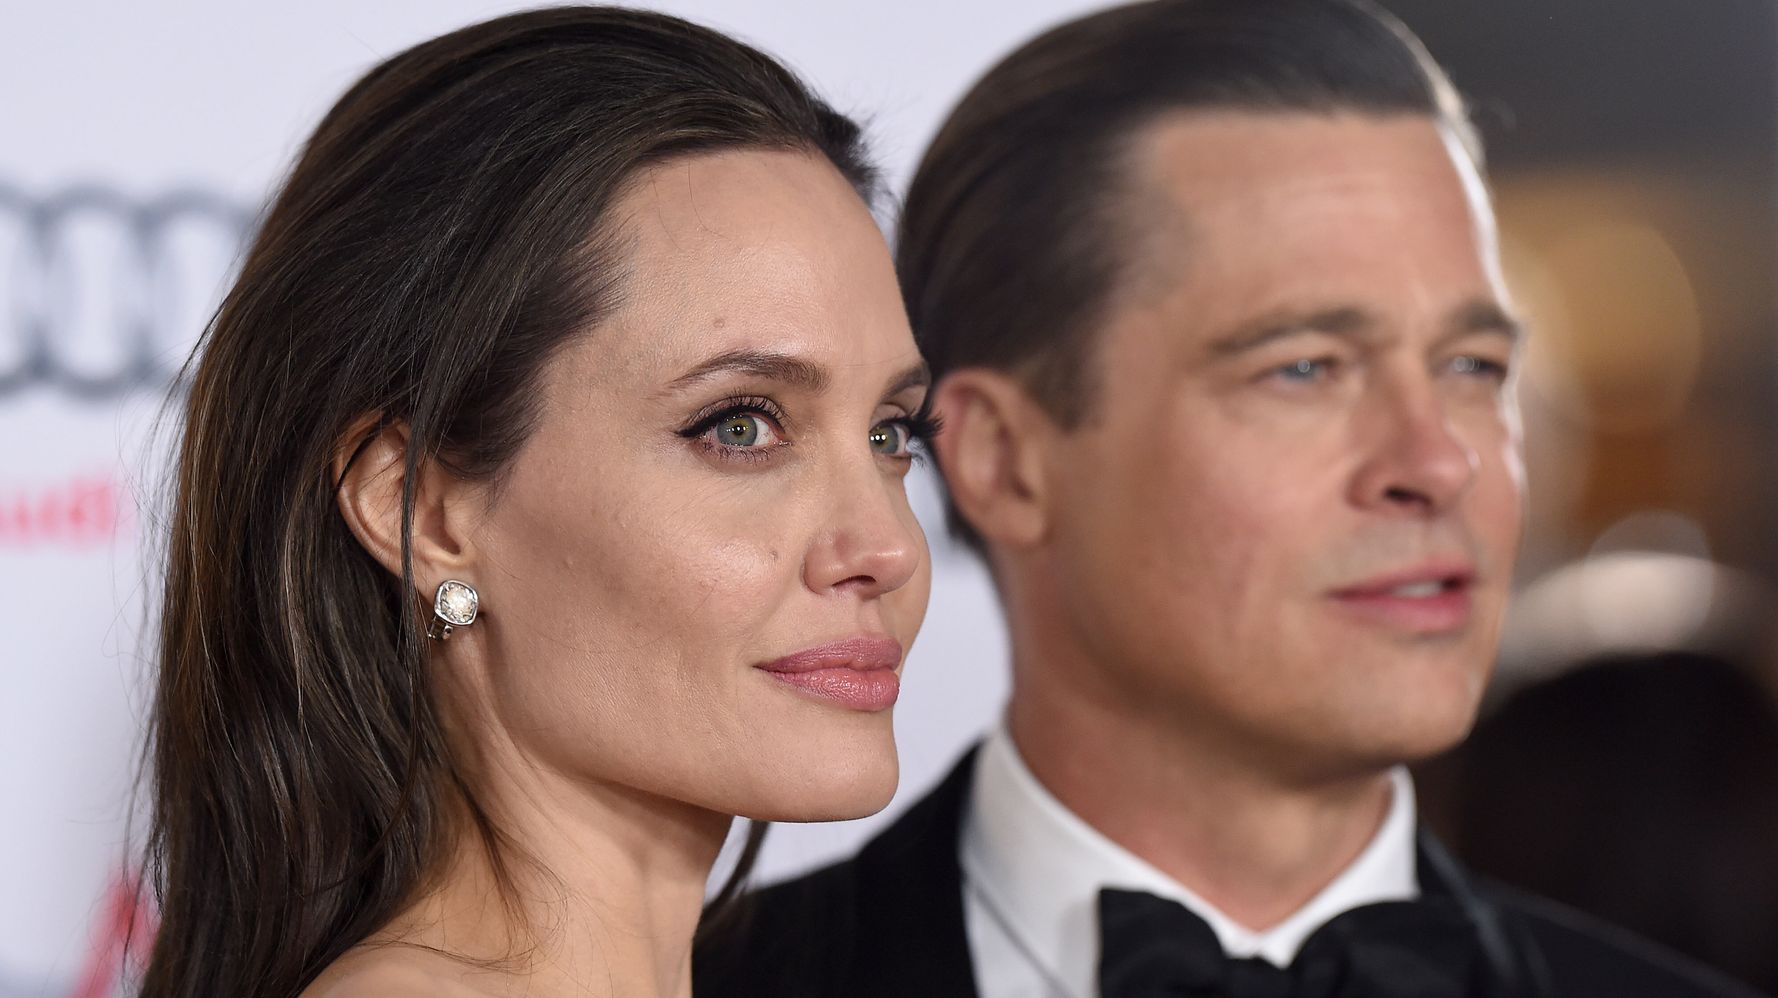 Angelina Jolie Says She Feared For Safety Of 'Whole Family' During Brad Pitt Marriage